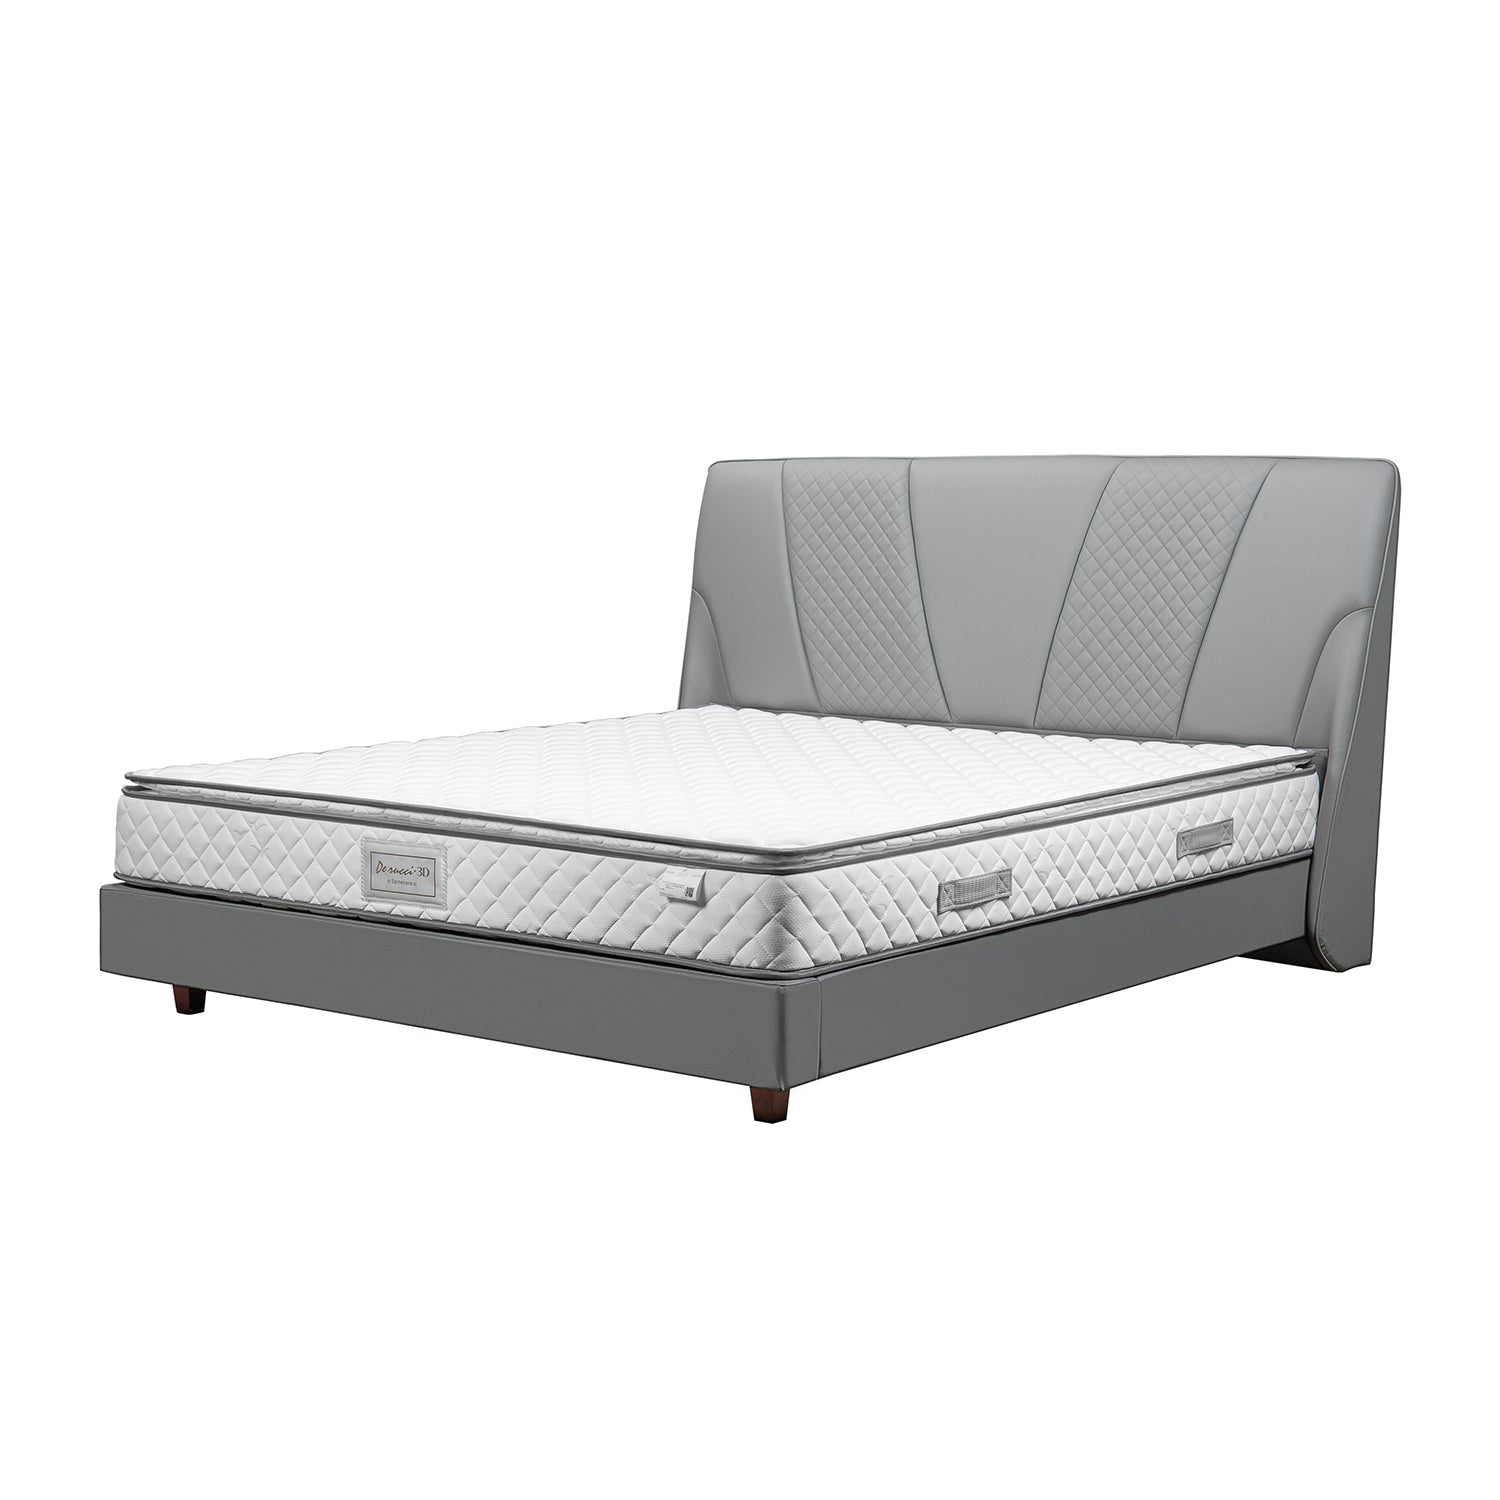 DeRUCCI bed frame BOC1 - 005 with a grey upholstered headboard and a white mattress featuring a 3-zone pocket spring system for individual support and minimal partner disturbance